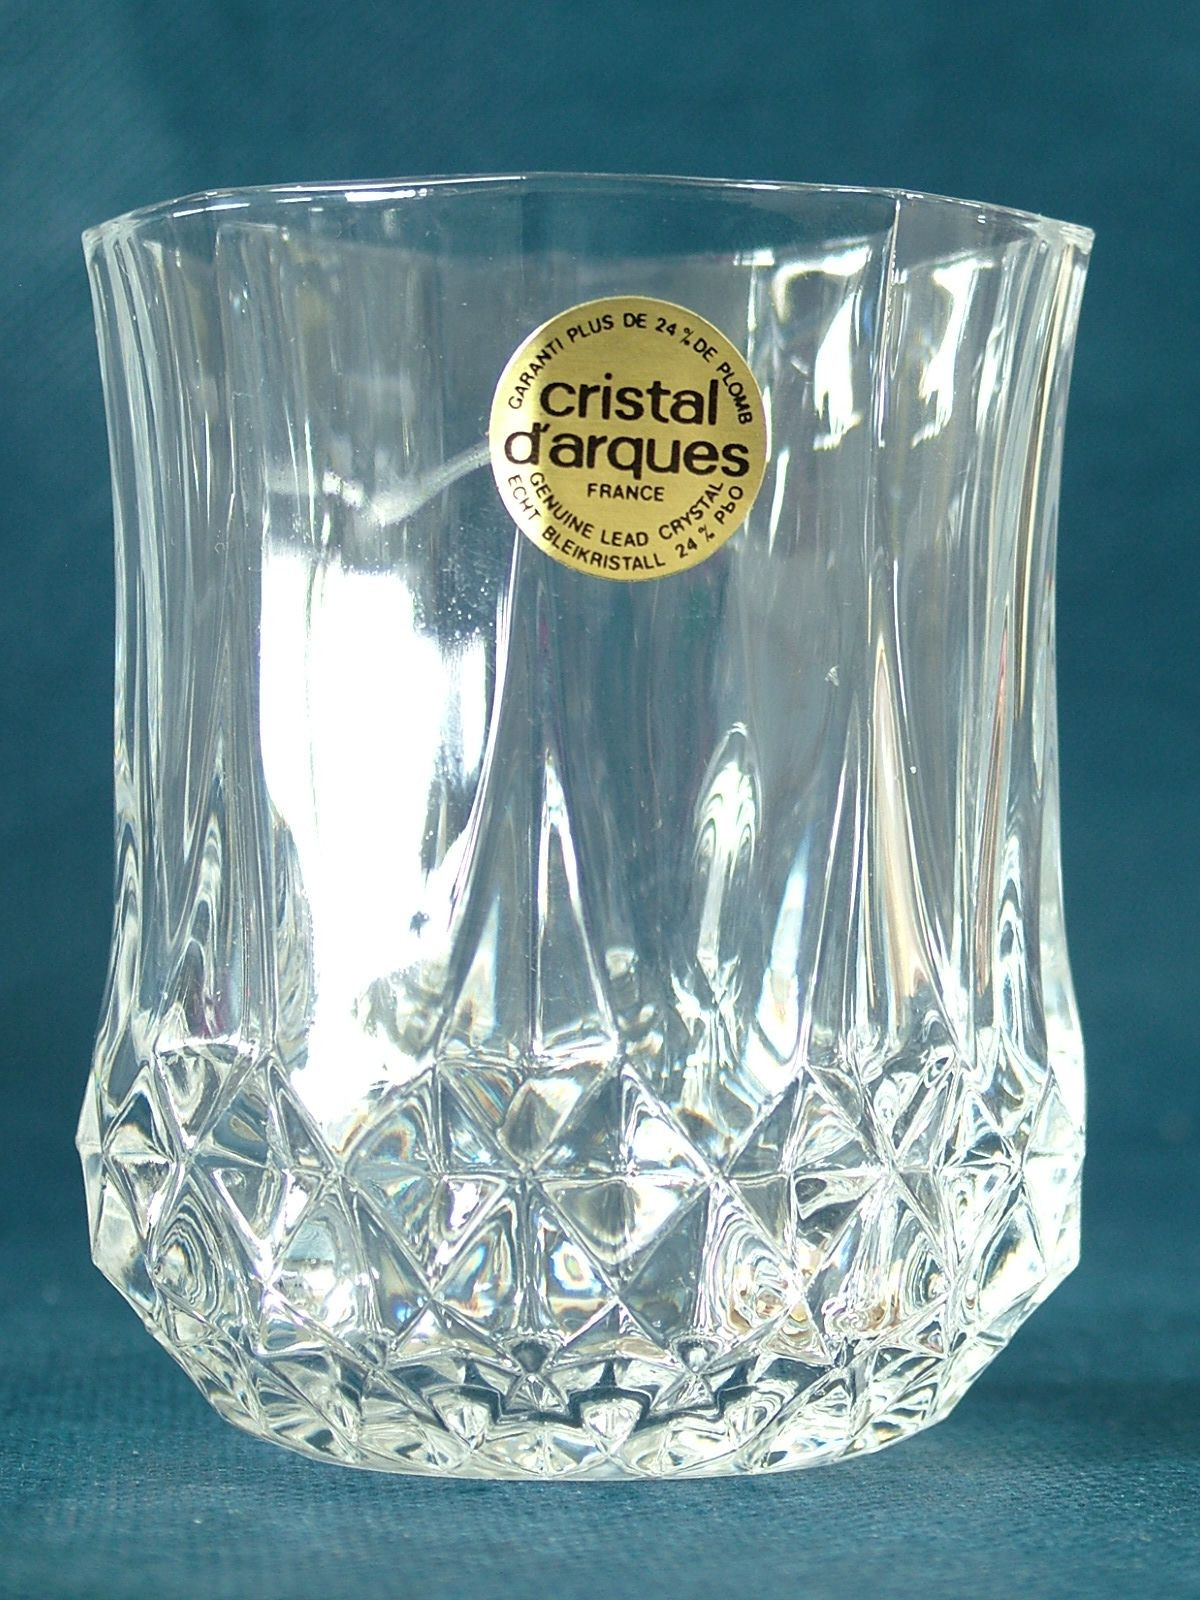 16 Lovely Cristal D Arques Lead Crystal Vase 2024 free download cristal d arques lead crystal vase of the 7 best cristal darques glass images on pinterest in 2018 regarding 87e9240486053f34e83a29c85dd7b3dd